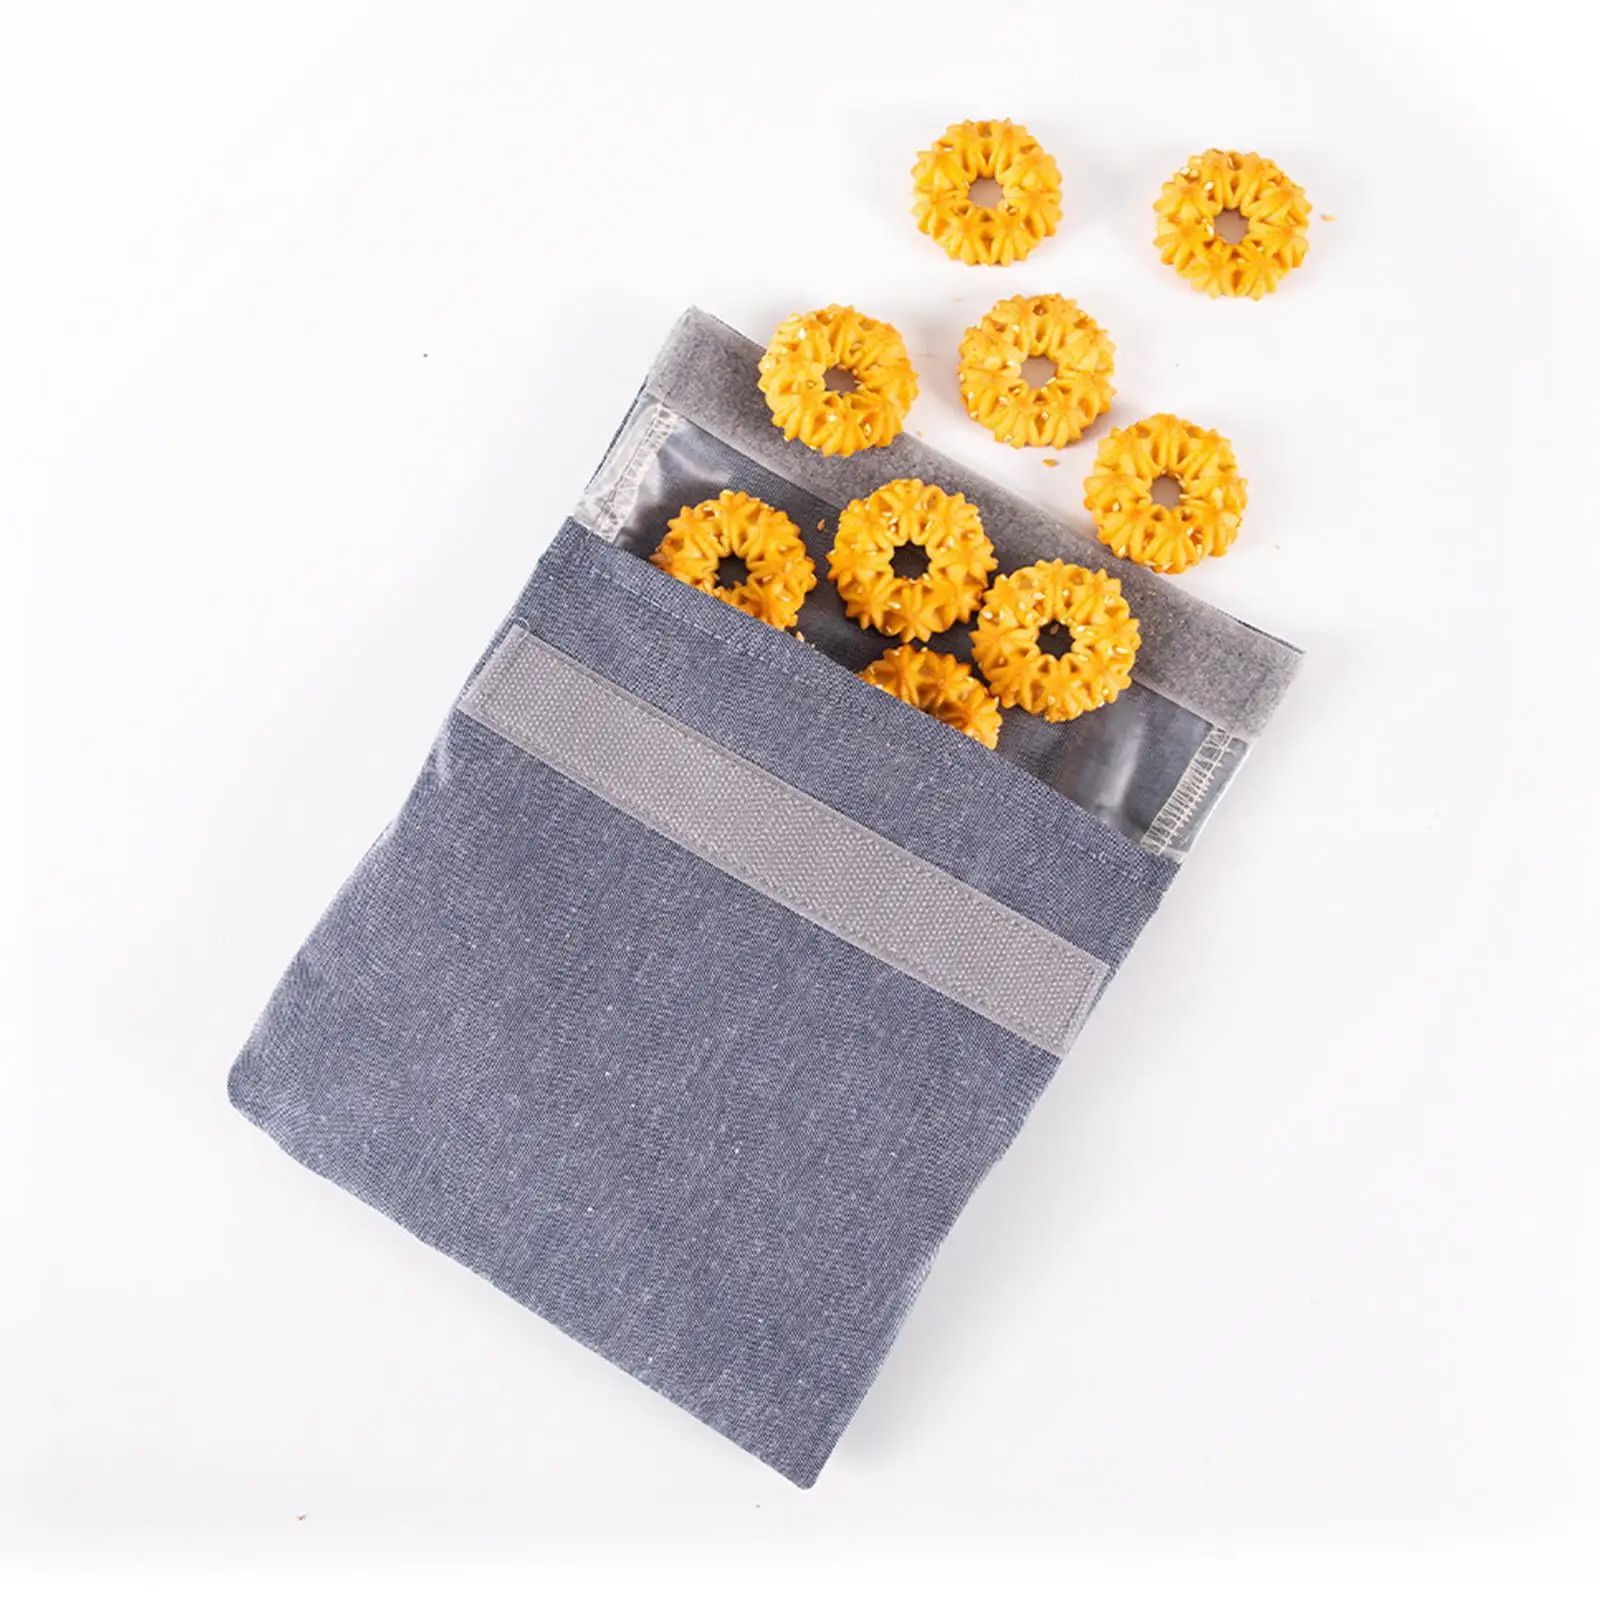 Fabric snack storage bag Fruit Storage Pouch Container Reusable Washable Multifunctional Sandwich Bag Food Storage Bag for